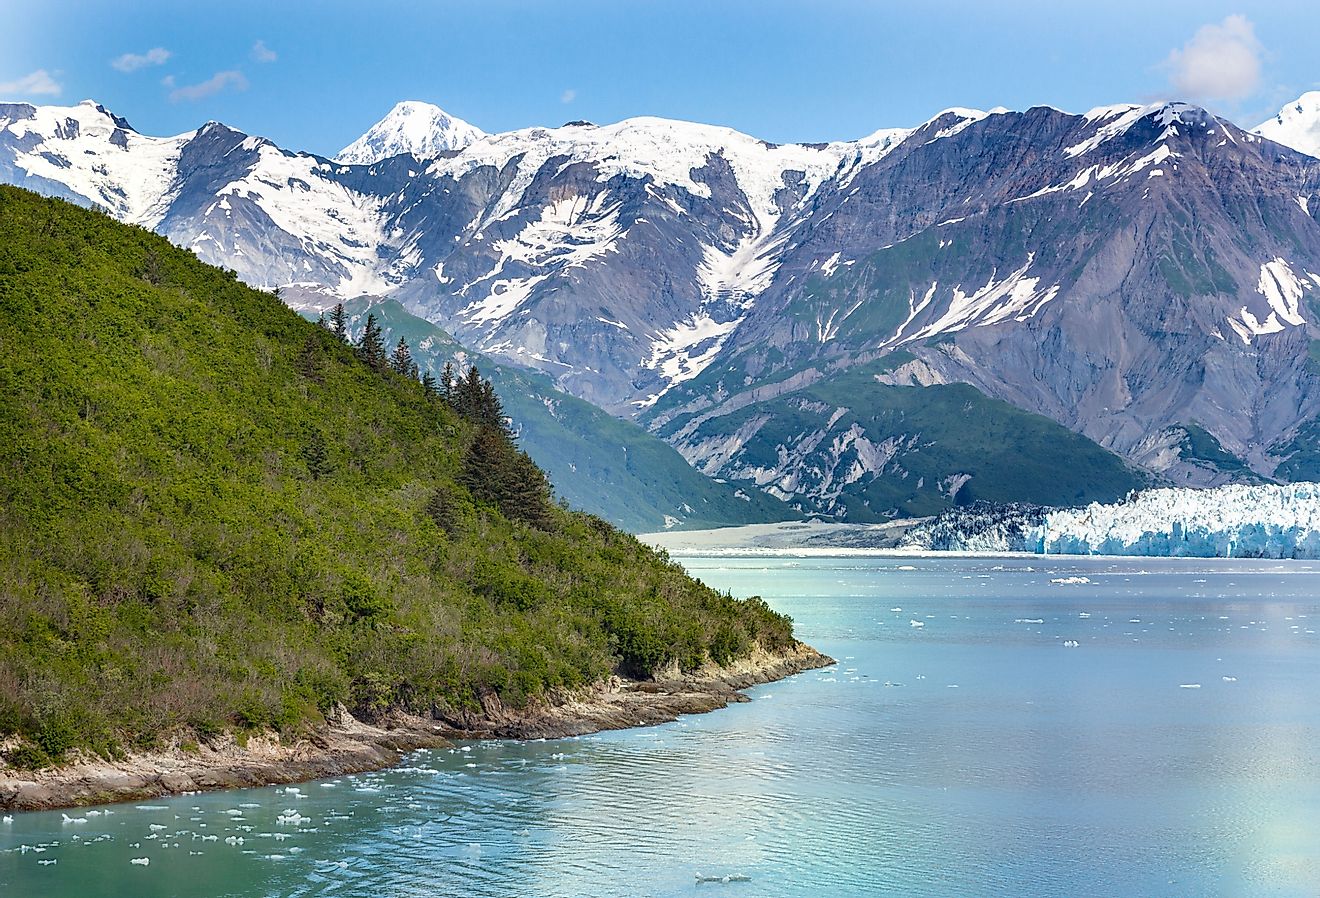 A scenic view from a ship of the Glacier Bay National Park and Preserve. Image credit RUBEN M RAMOS via Shutterstock. 